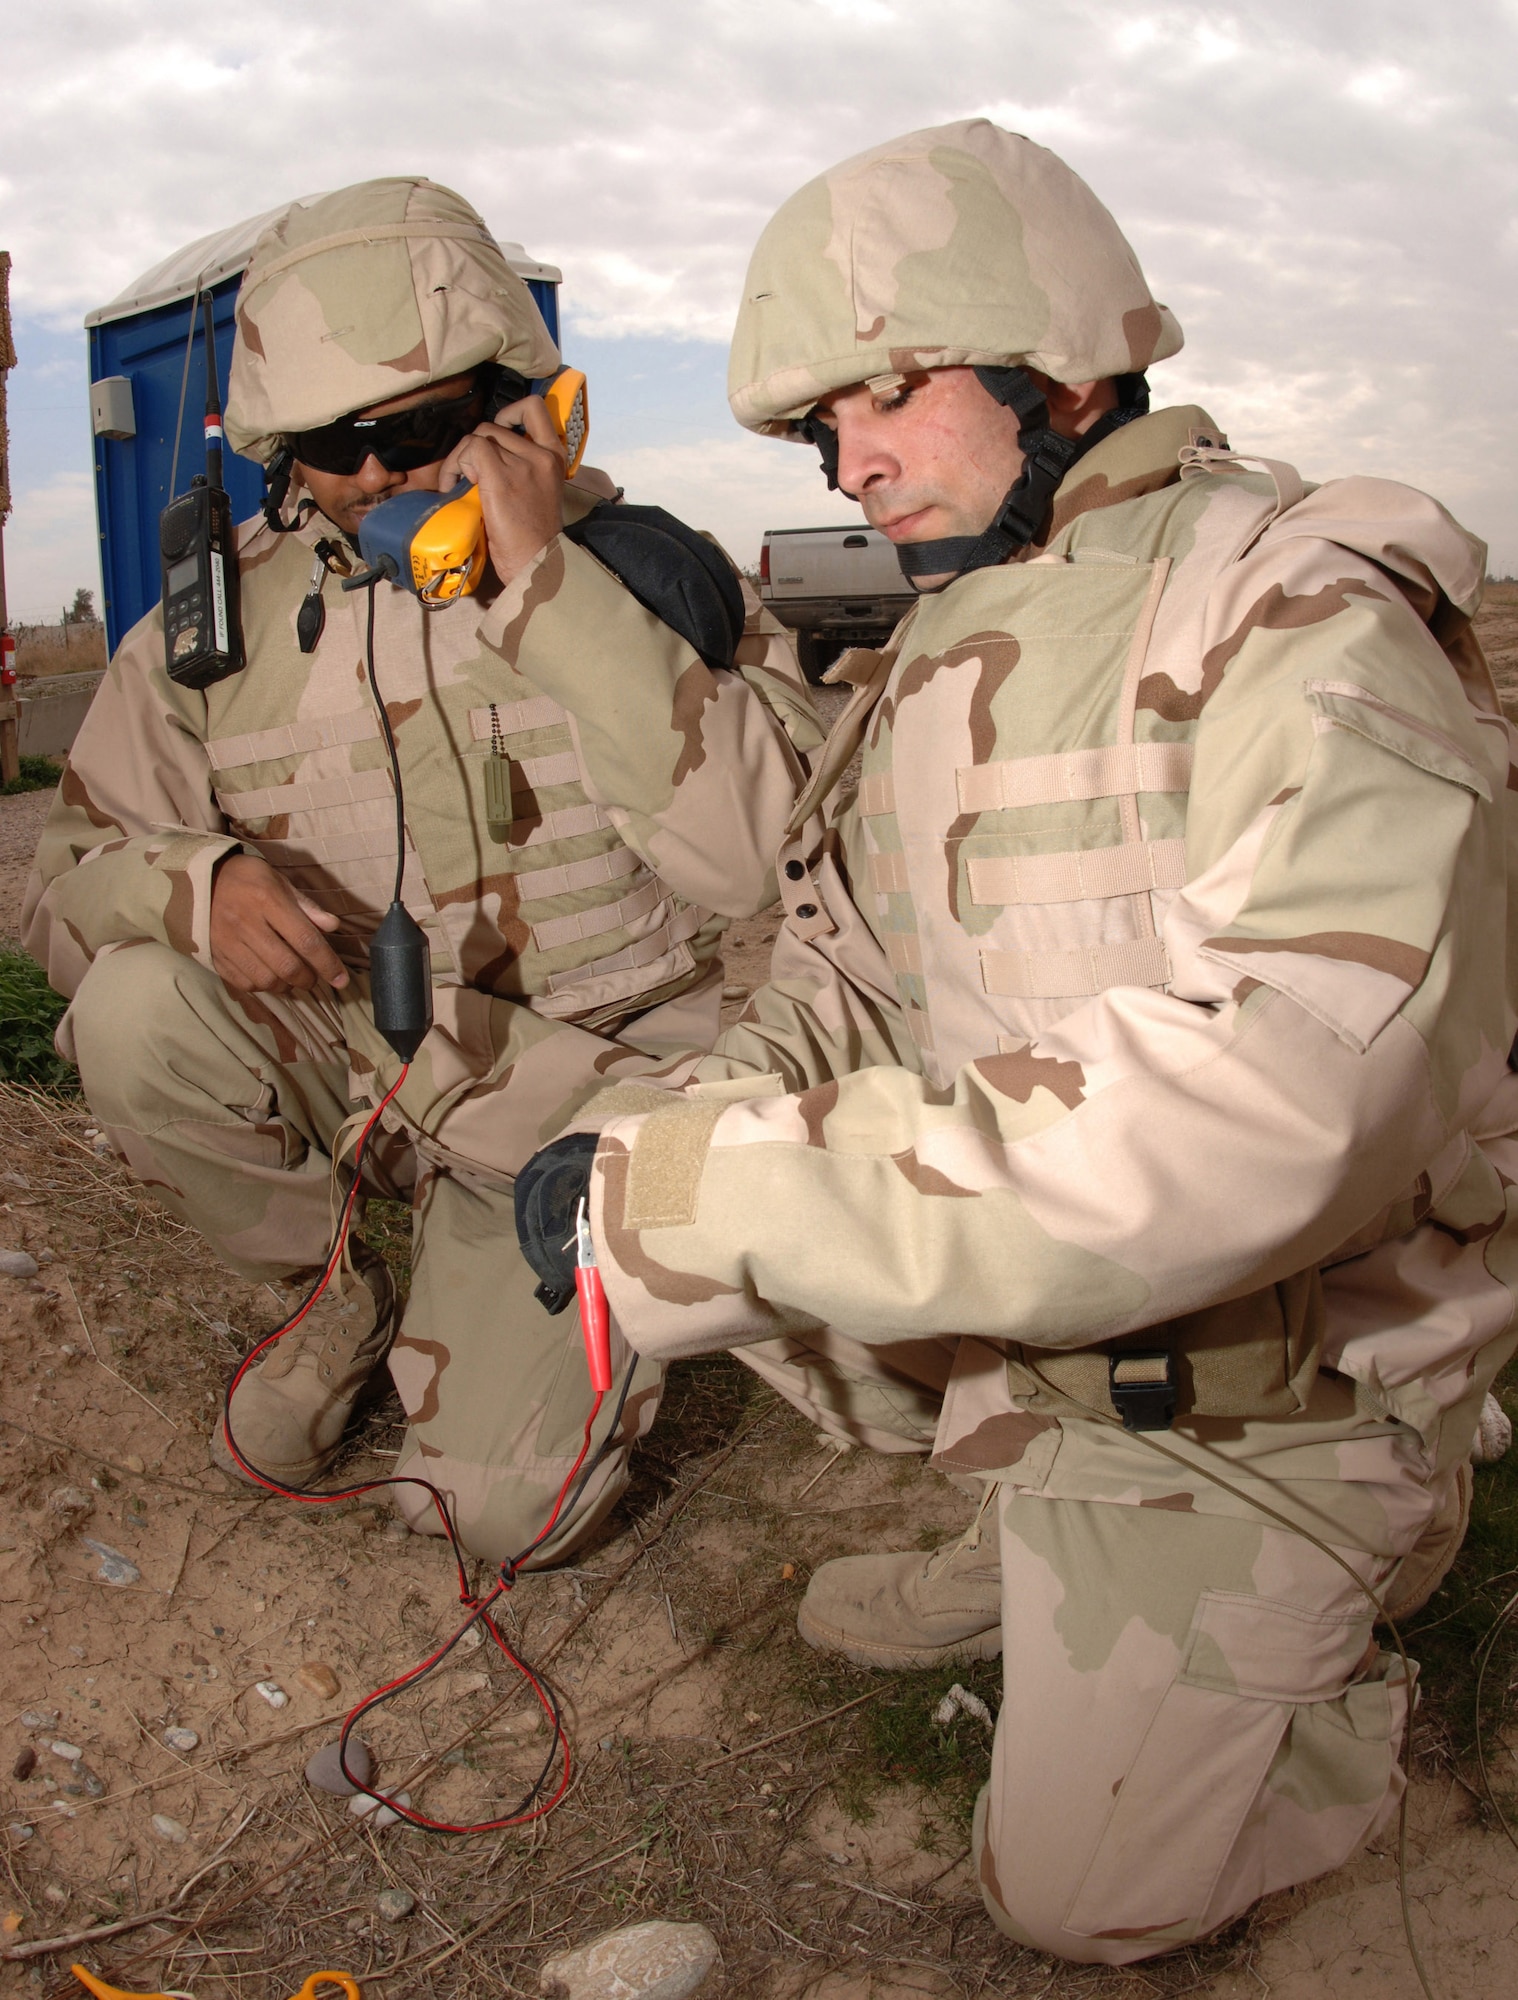 Communications and Information specialists like Senior Airman Kenneth Hawkins and Airman 1st Class Ryan Gall, seen here testing cutfield wires for a dial tone in Iraq, will soon see changes to their job requirements as the Air Force proposes 15 new cyberspace career fields. These voice systems technicians are just two of the approximately 30,000 active-duty members who'll be affected by the changes. (U.S. Air Force photo/Senior Airman Bradley A. Lail)